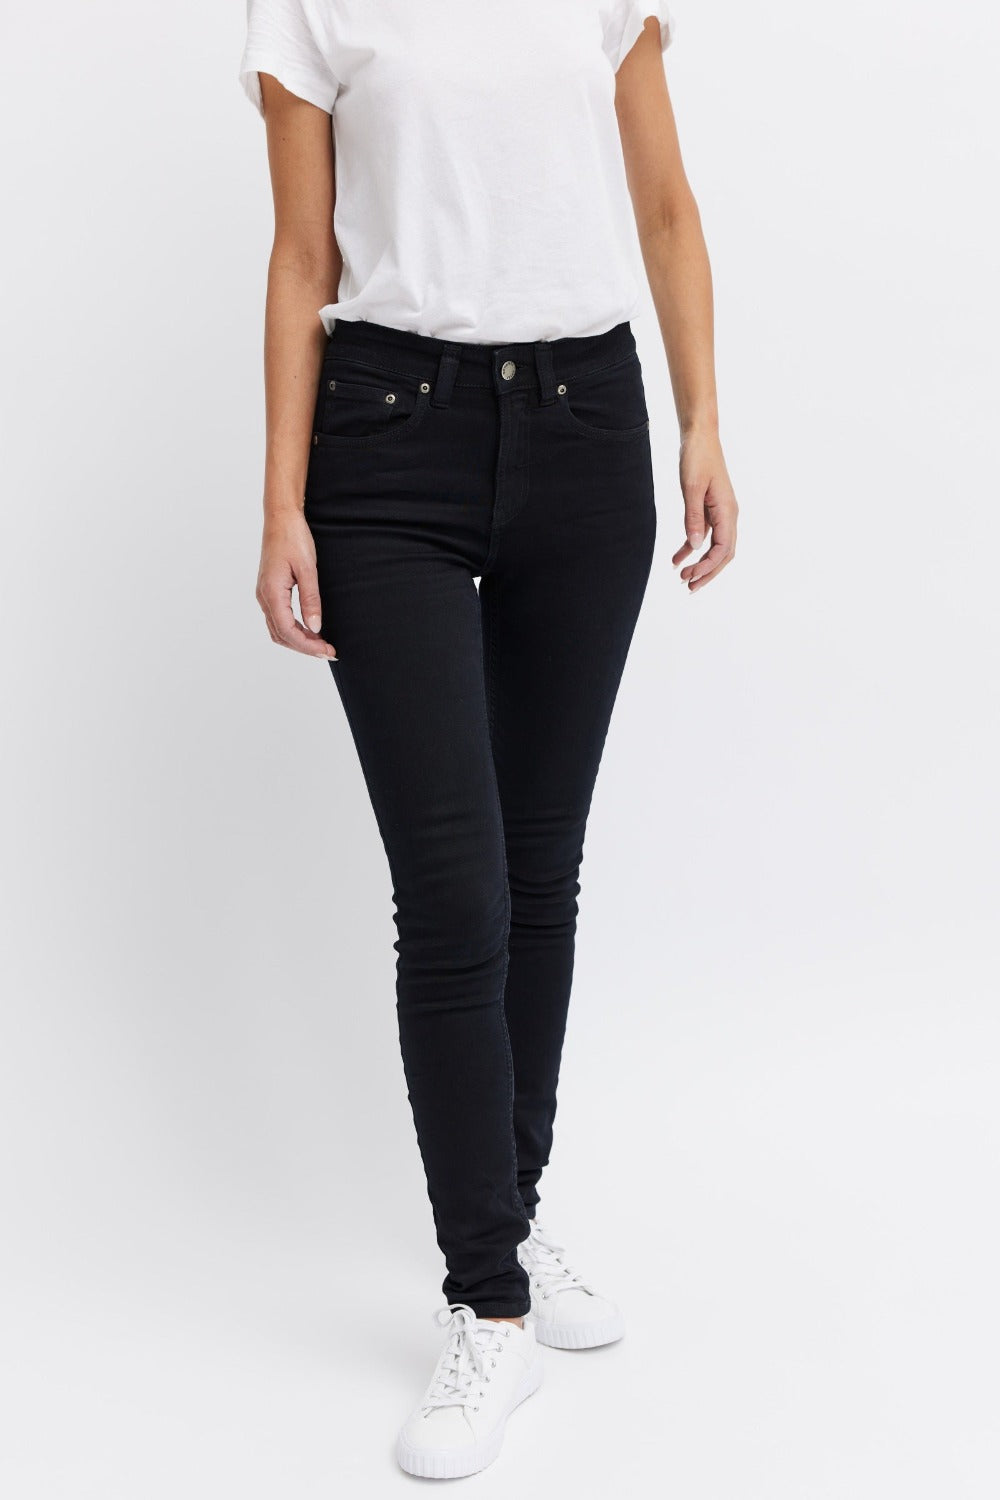 Nordic Swan Ecolabel black jeans for women - organic and recycled fibers